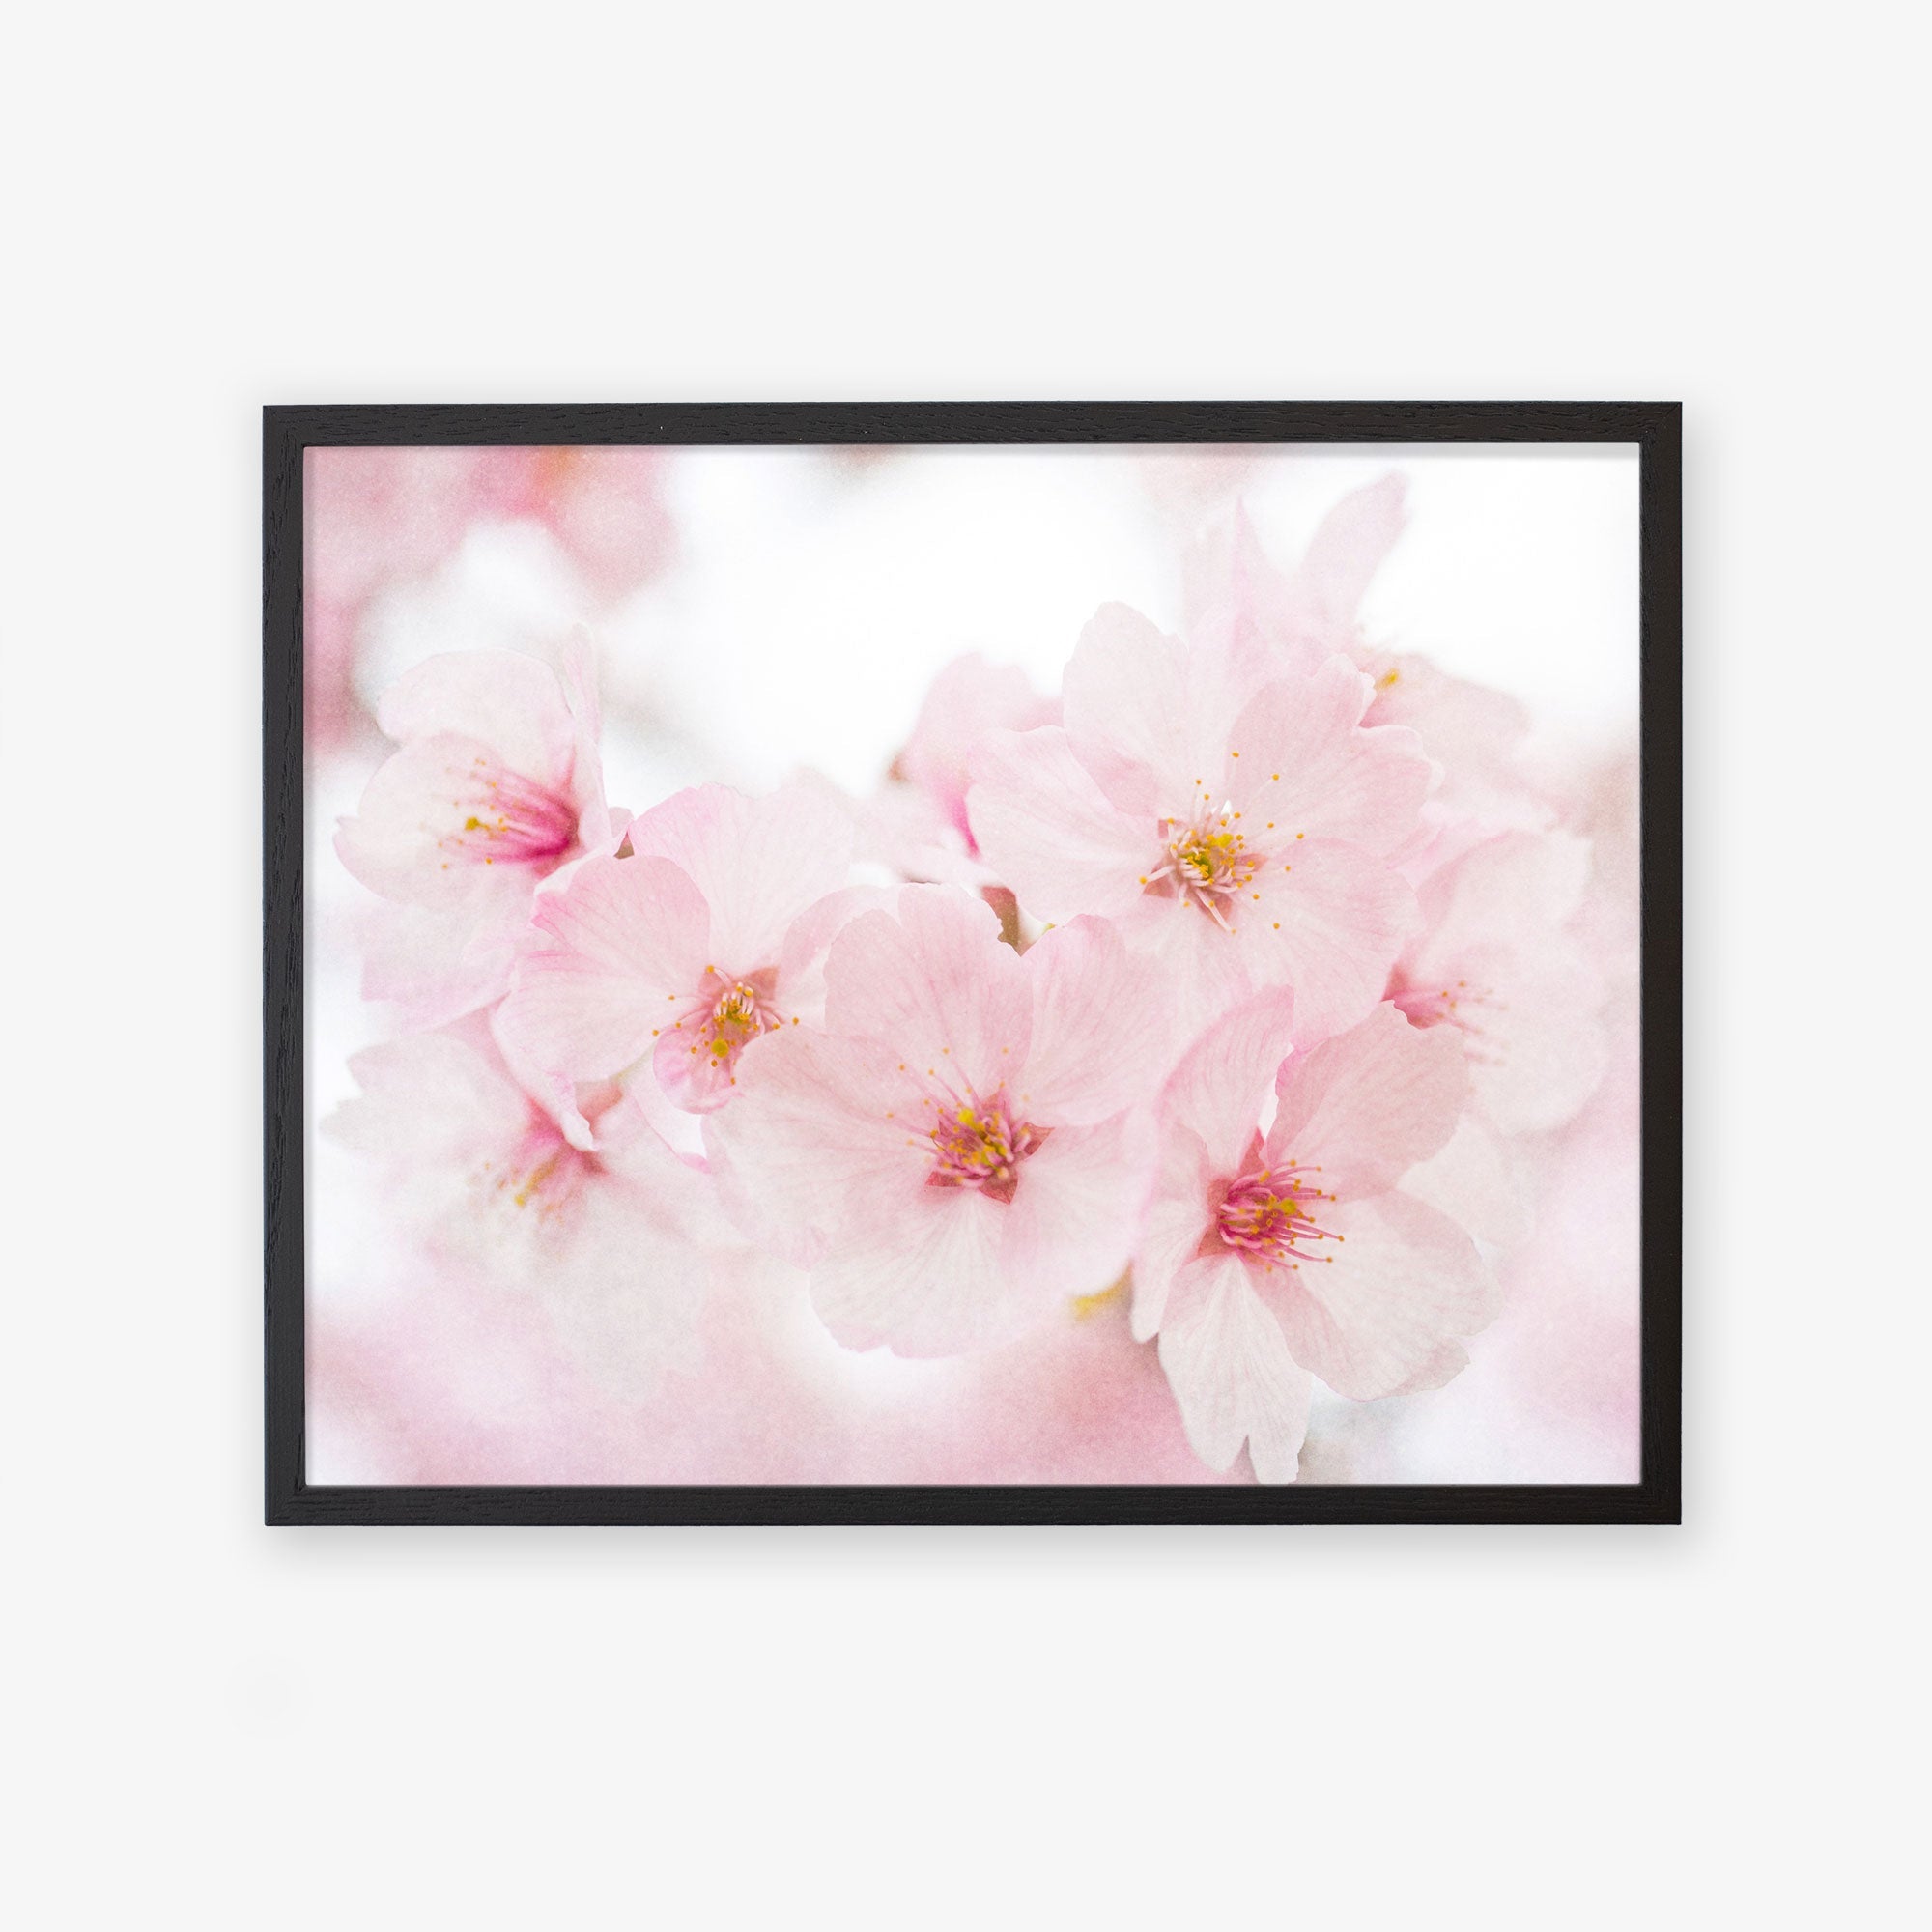 A framed photograph of delicate pink cherry blossoms printed on archival photographic paper, displaying subtle shades of pink and white petals with visible stamens against a soft-focus background by Offley Green.